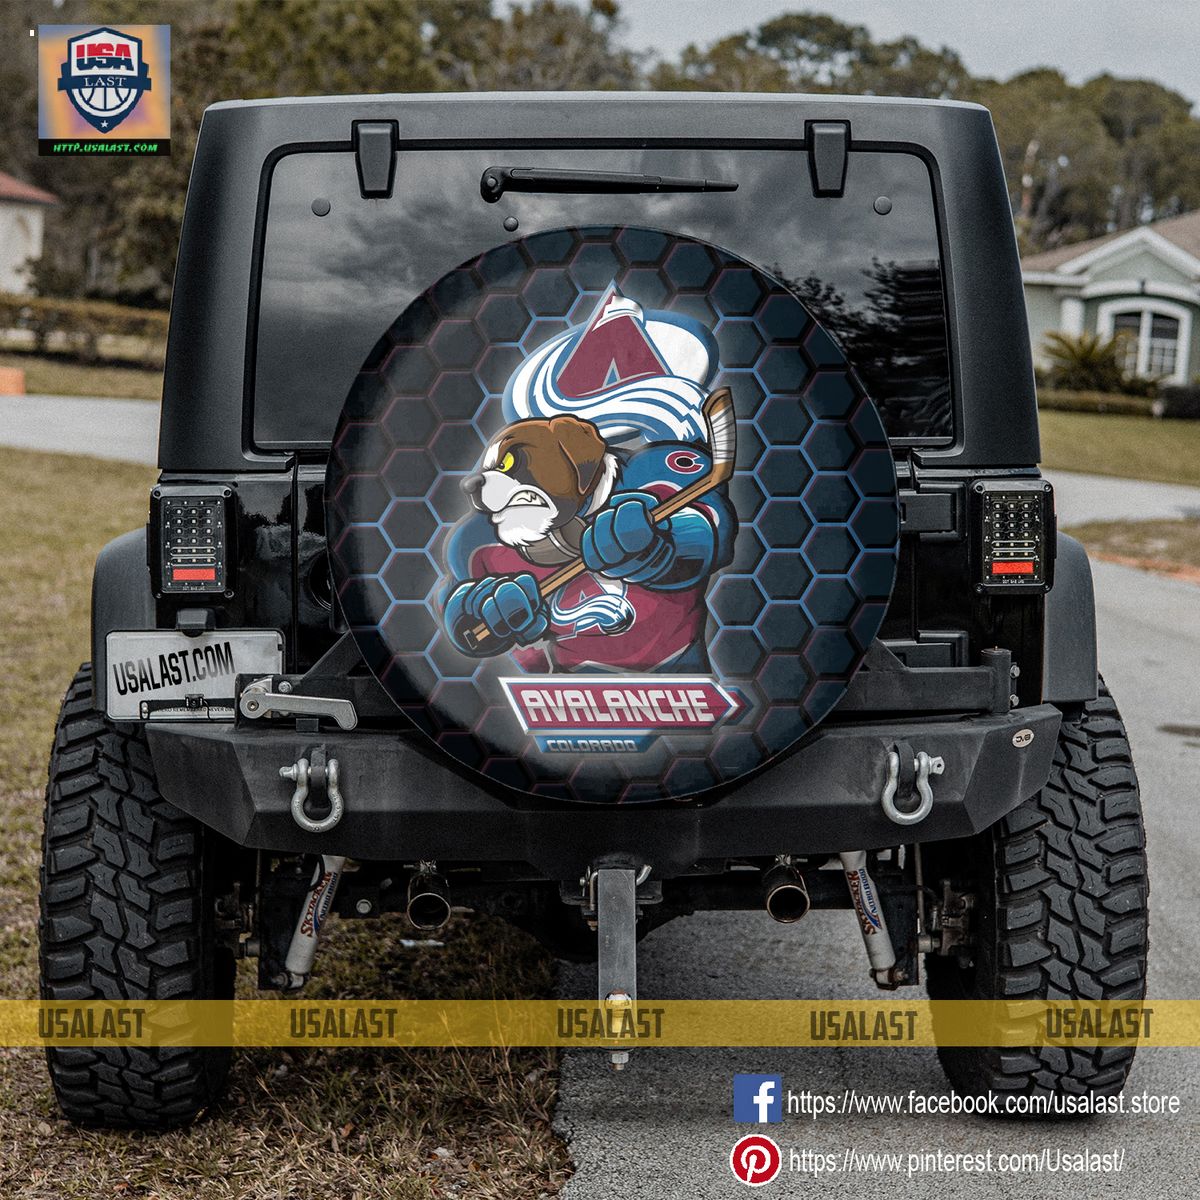 Colorado Avalanche MLB Mascot Spare Tire Cover - Wow! This is gracious